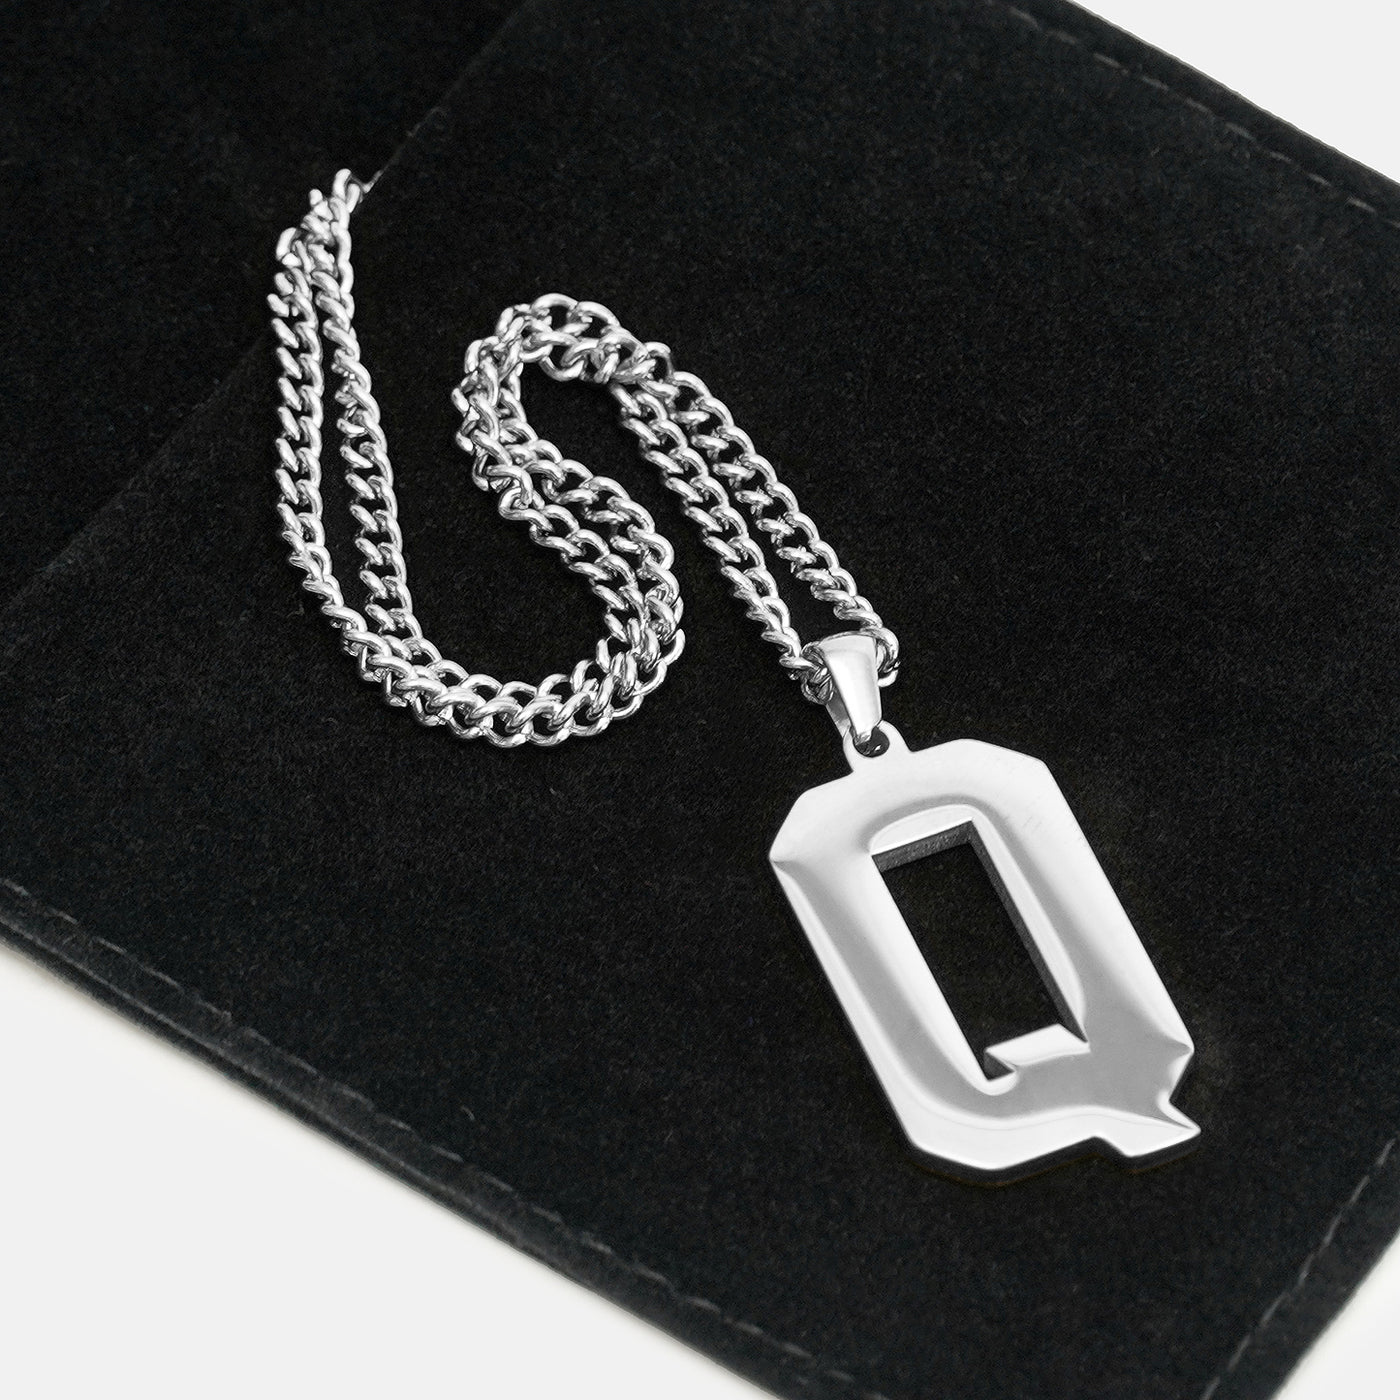 Q Letter Pendant with Chain Necklace - Stainless Steel